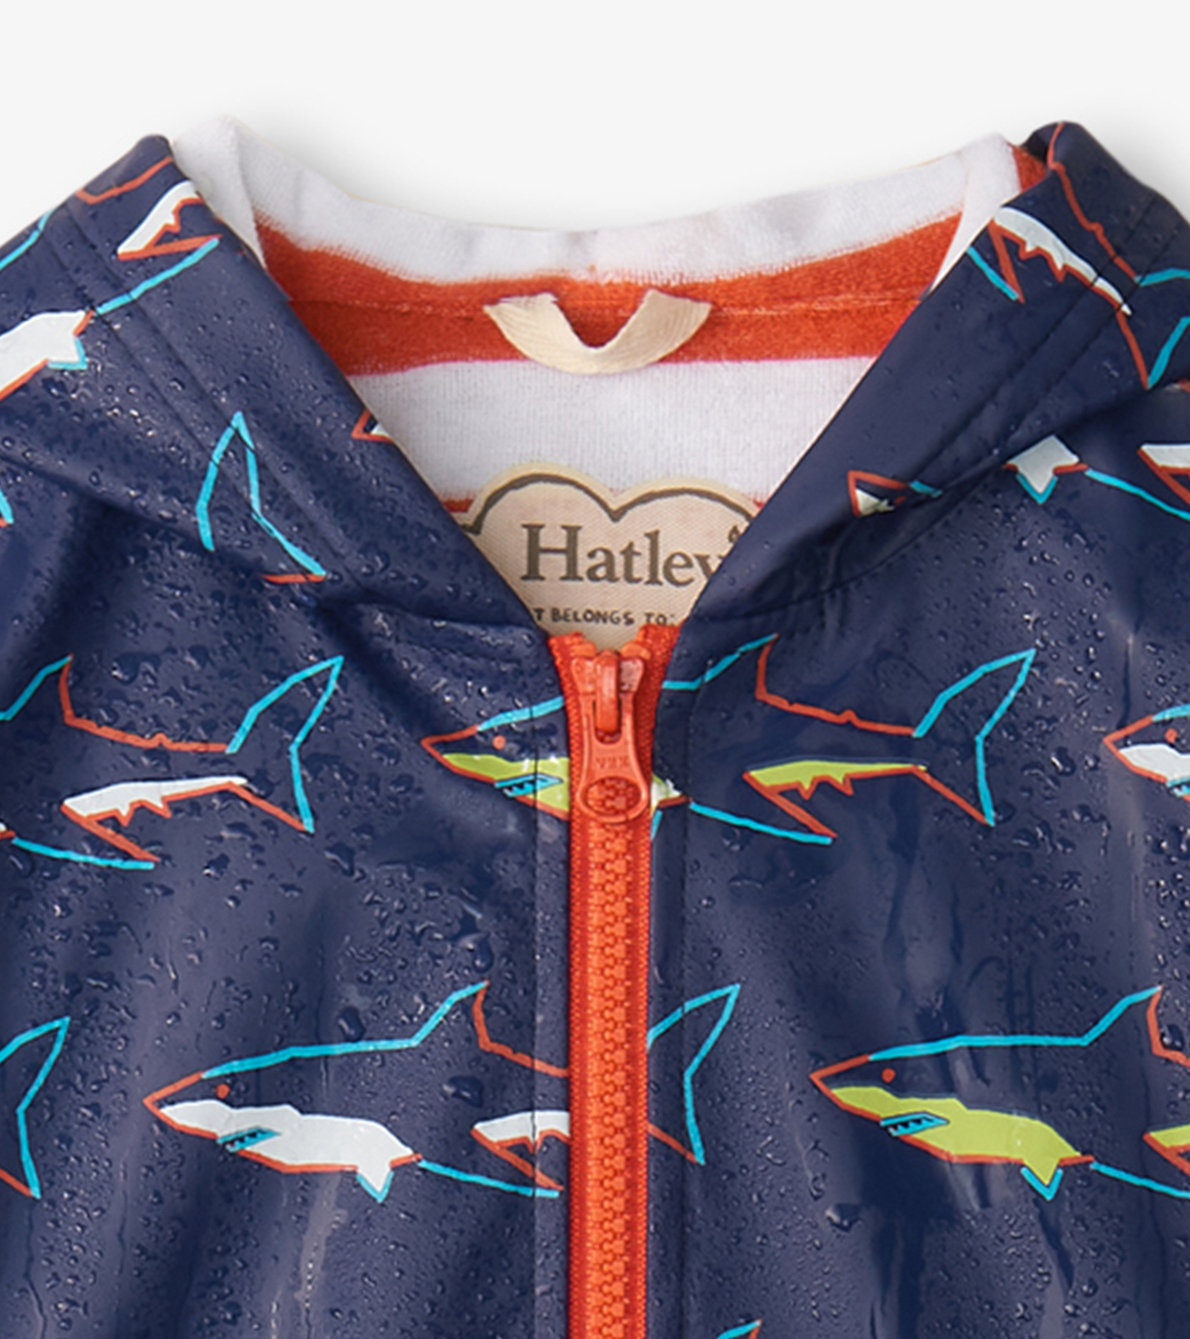 View larger image of Boys Sharks Colour Changing Rain Jacket